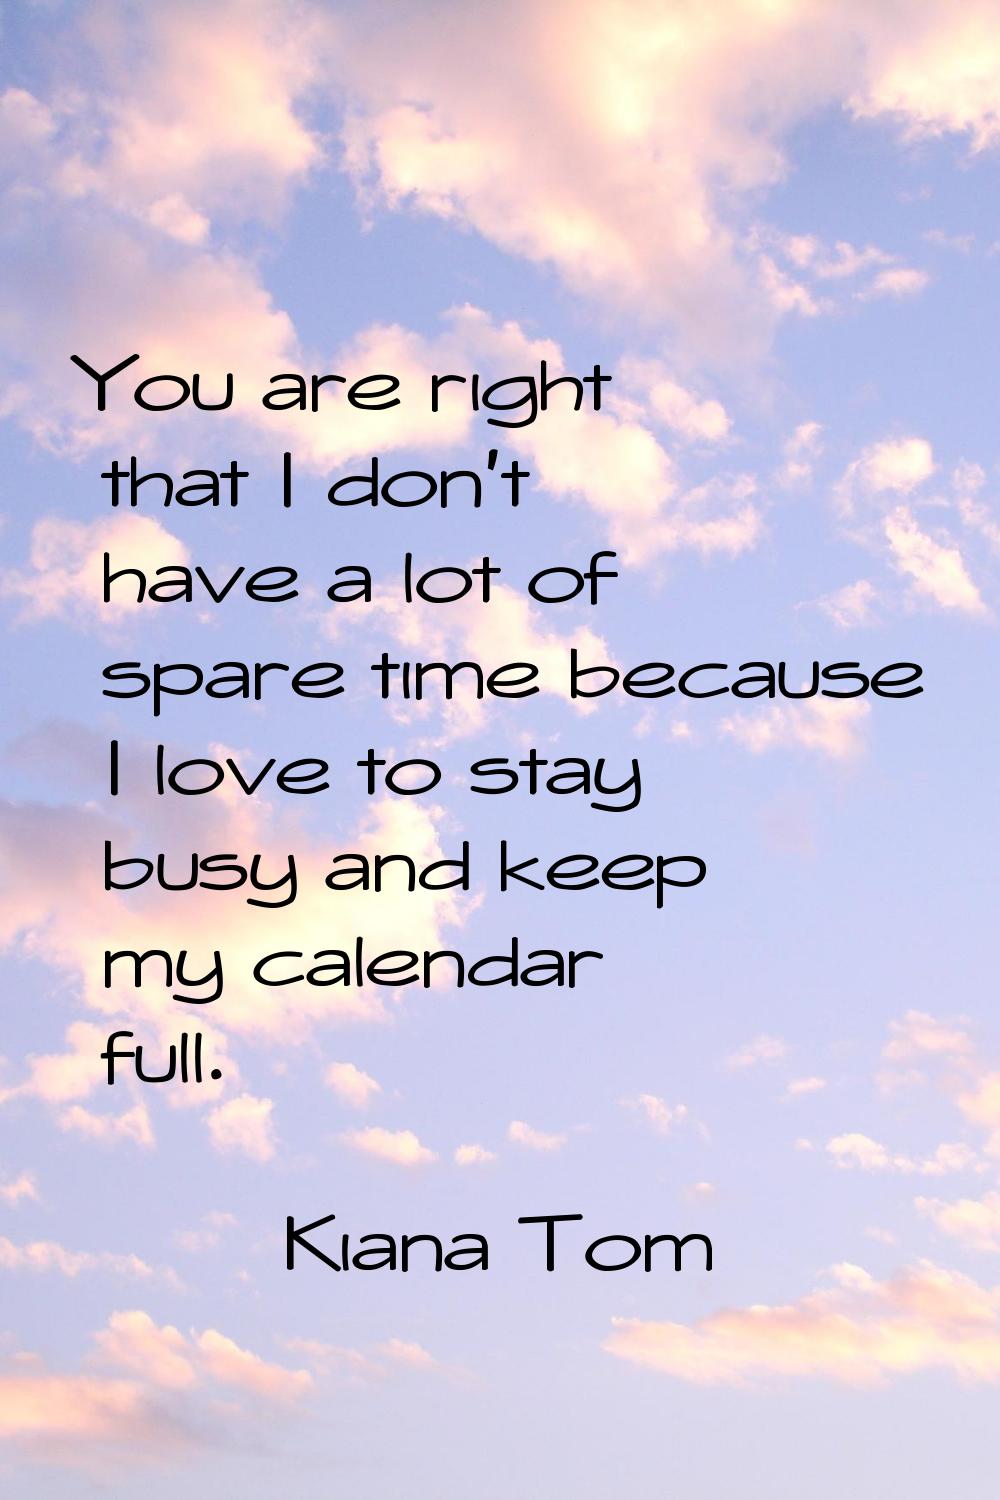 You are right that I don't have a lot of spare time because I love to stay busy and keep my calenda